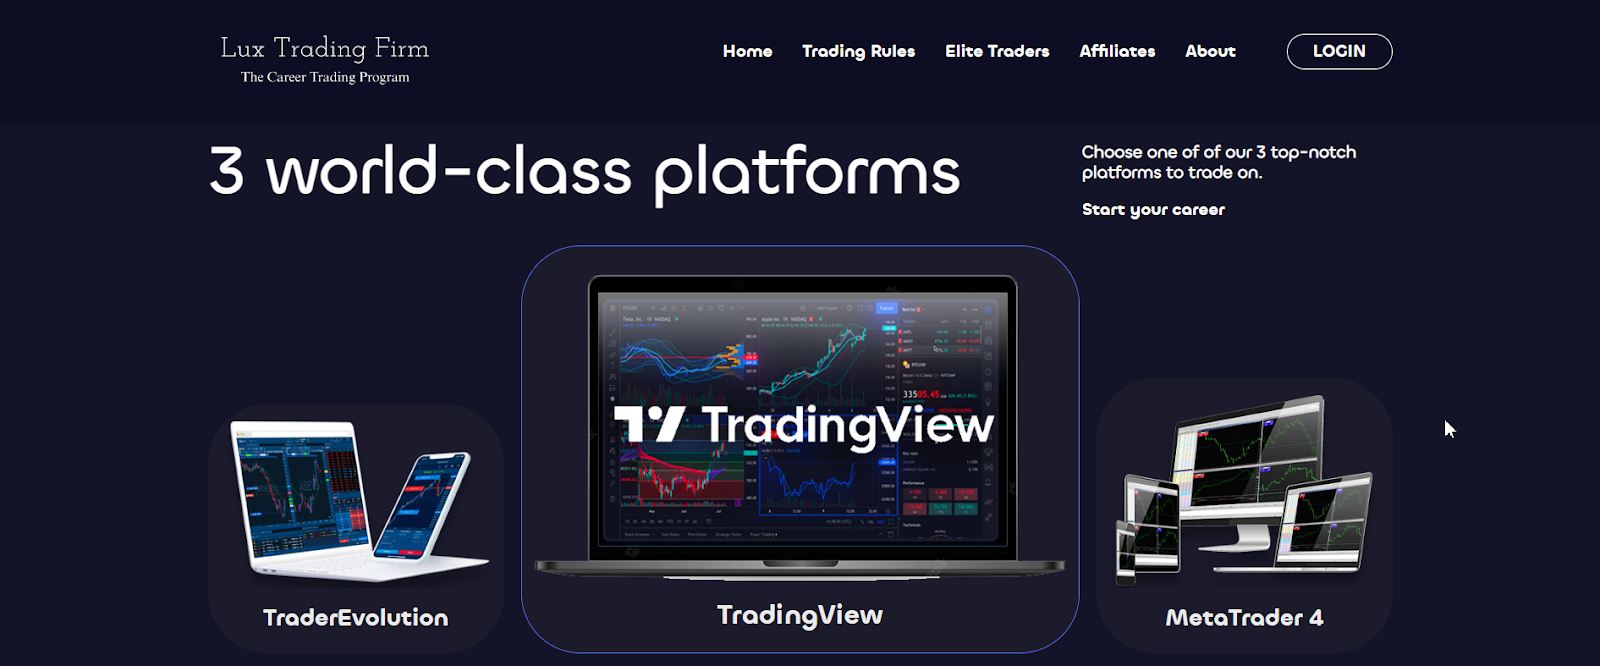 Review of Lux Trading Firm - Select a trading platform